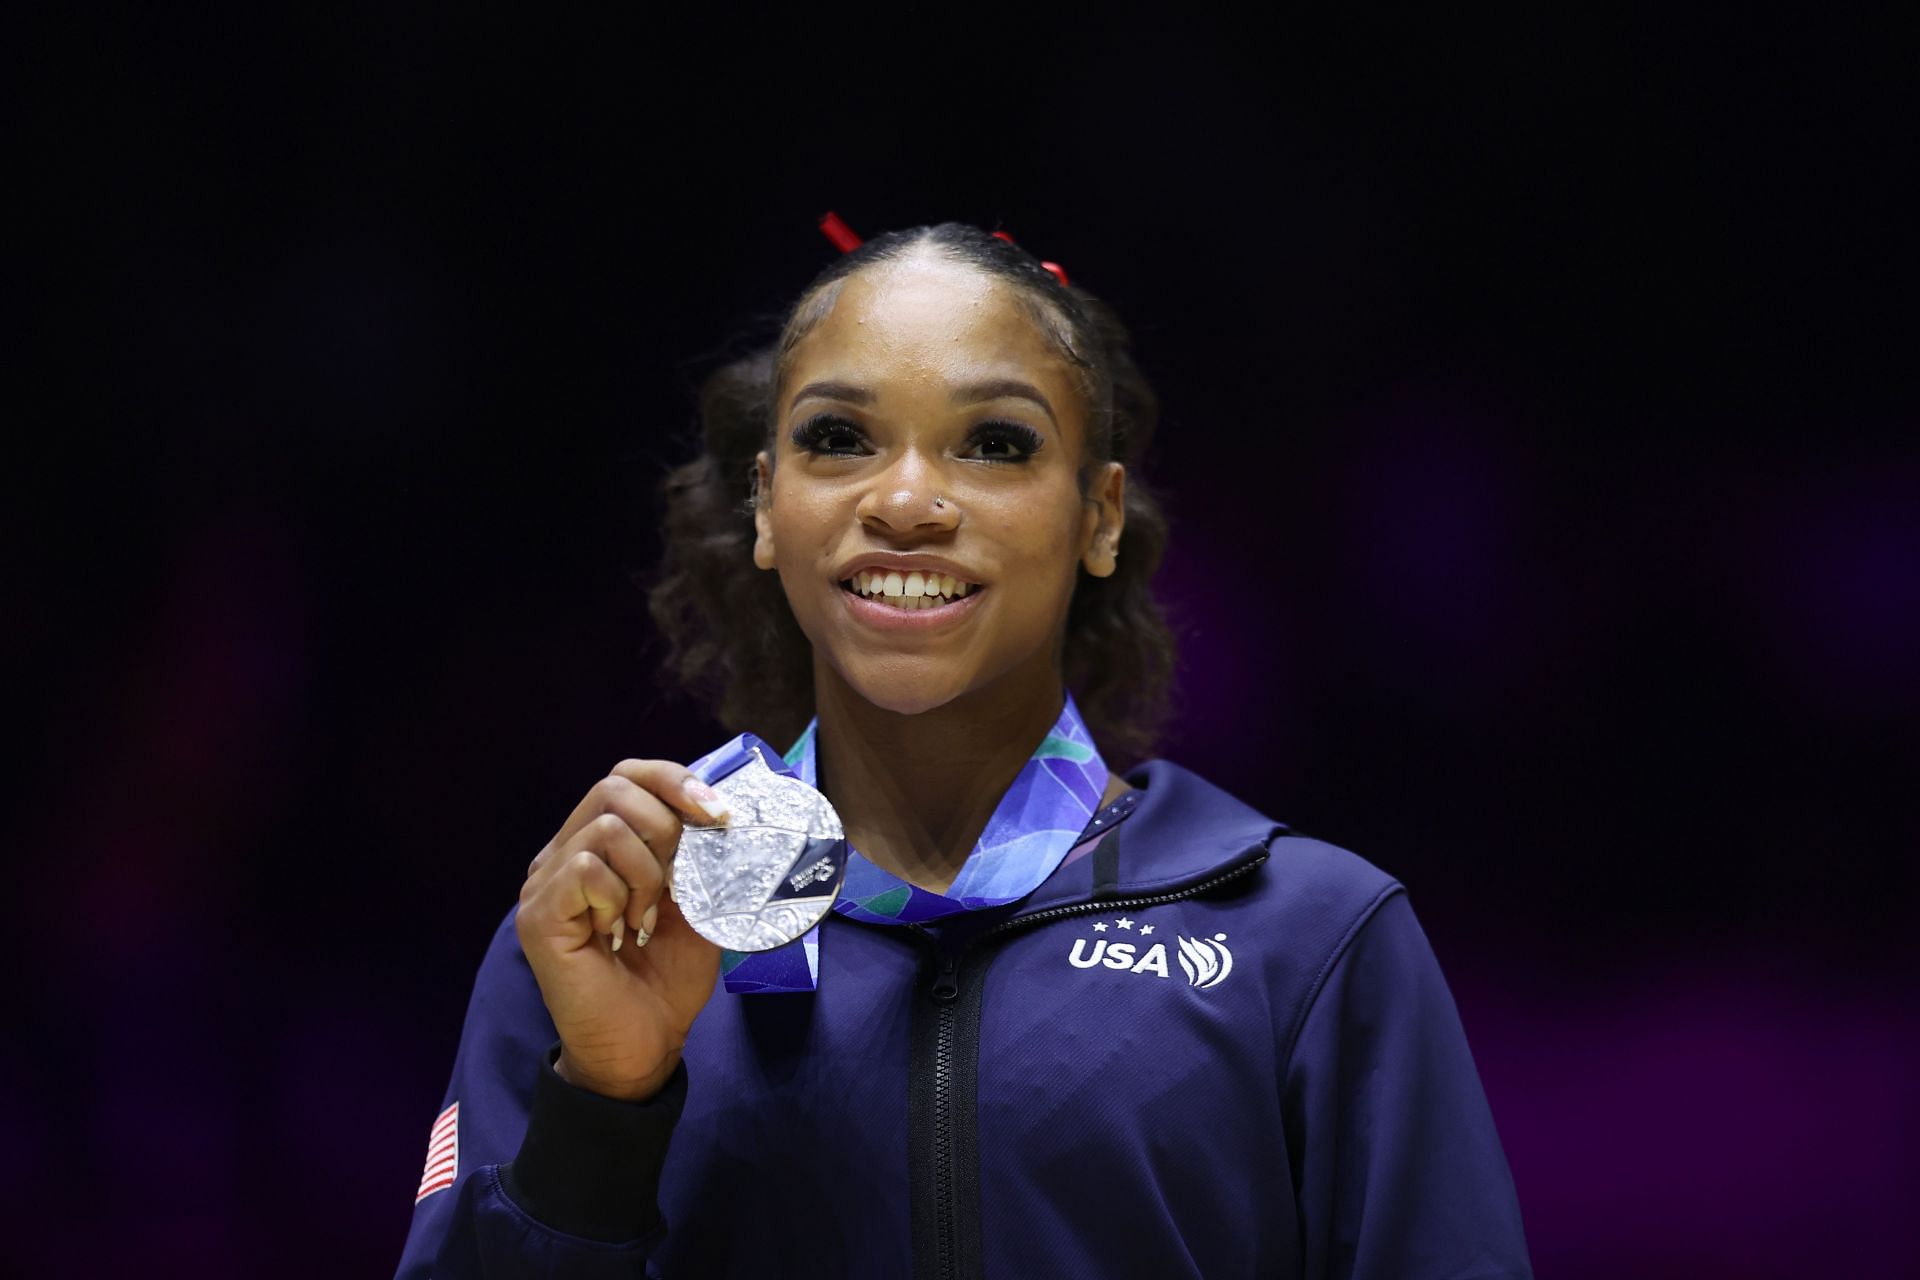 Shilese Jones poses for a photo during the medal ceremony for Women&#039;s All-Around Final at the 2022 Gymnastics World Championships . (Photo by Naomi Baker/Getty Images)